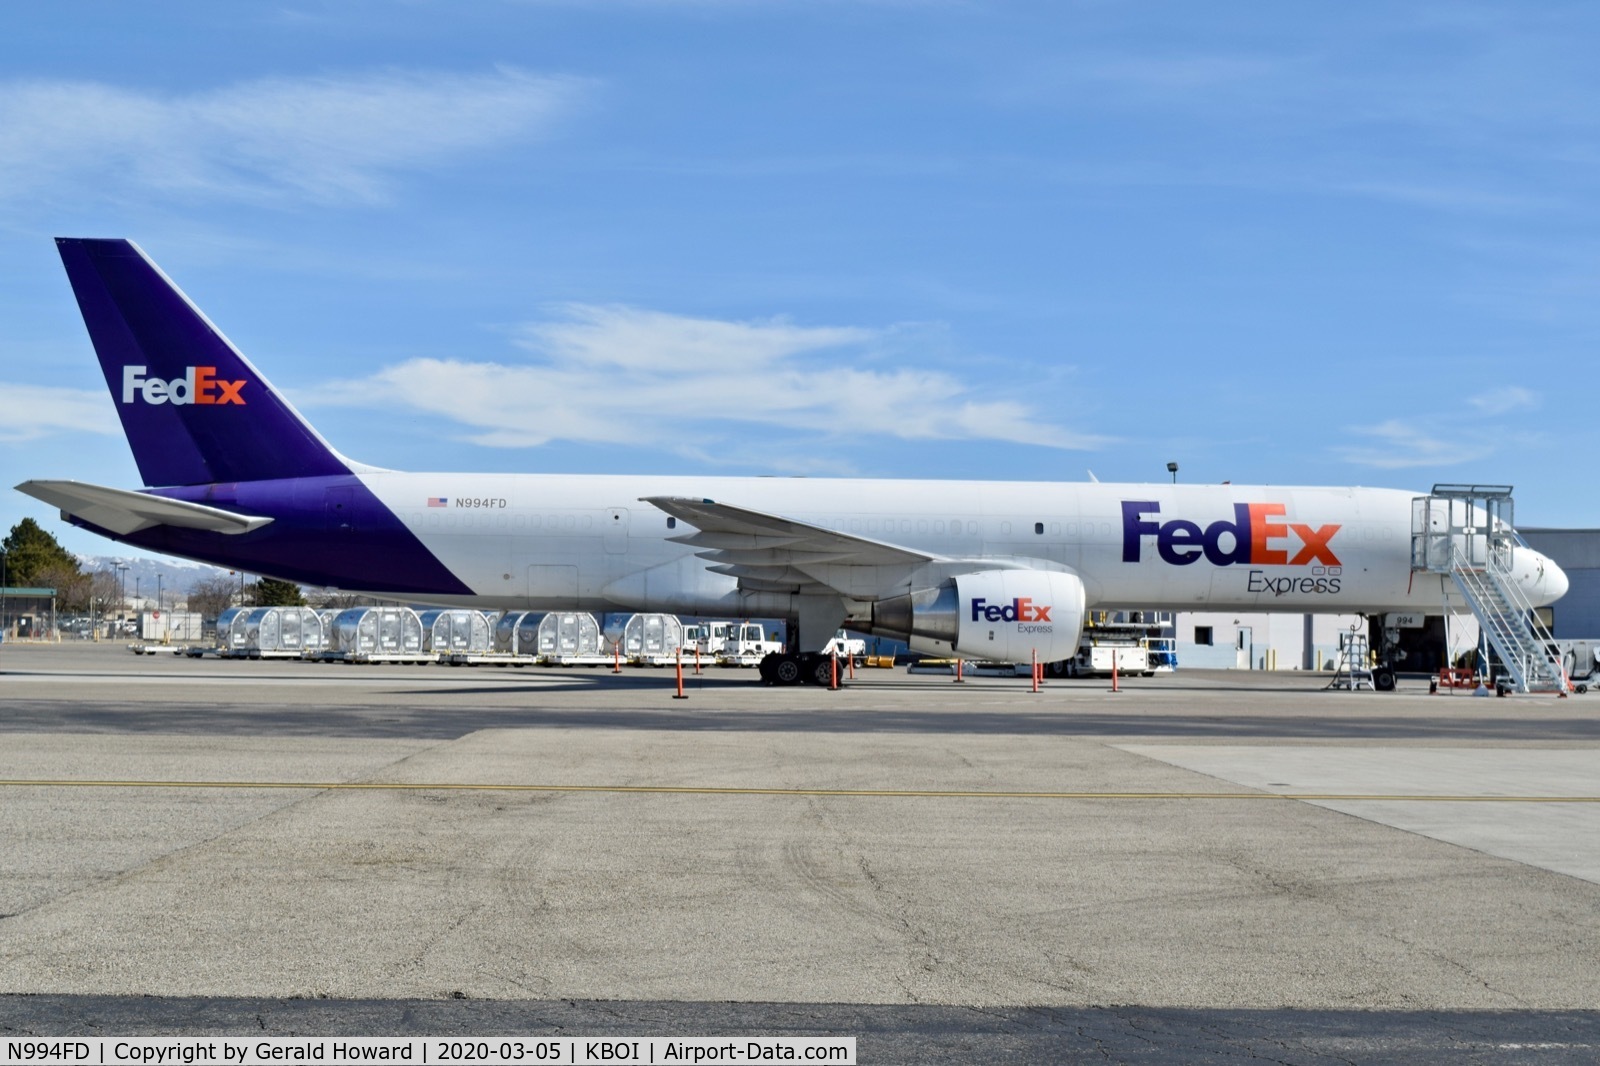 N994FD, 1992 Boeing 757-23A C/N 25490, Parked on the Fed Ex ramp.